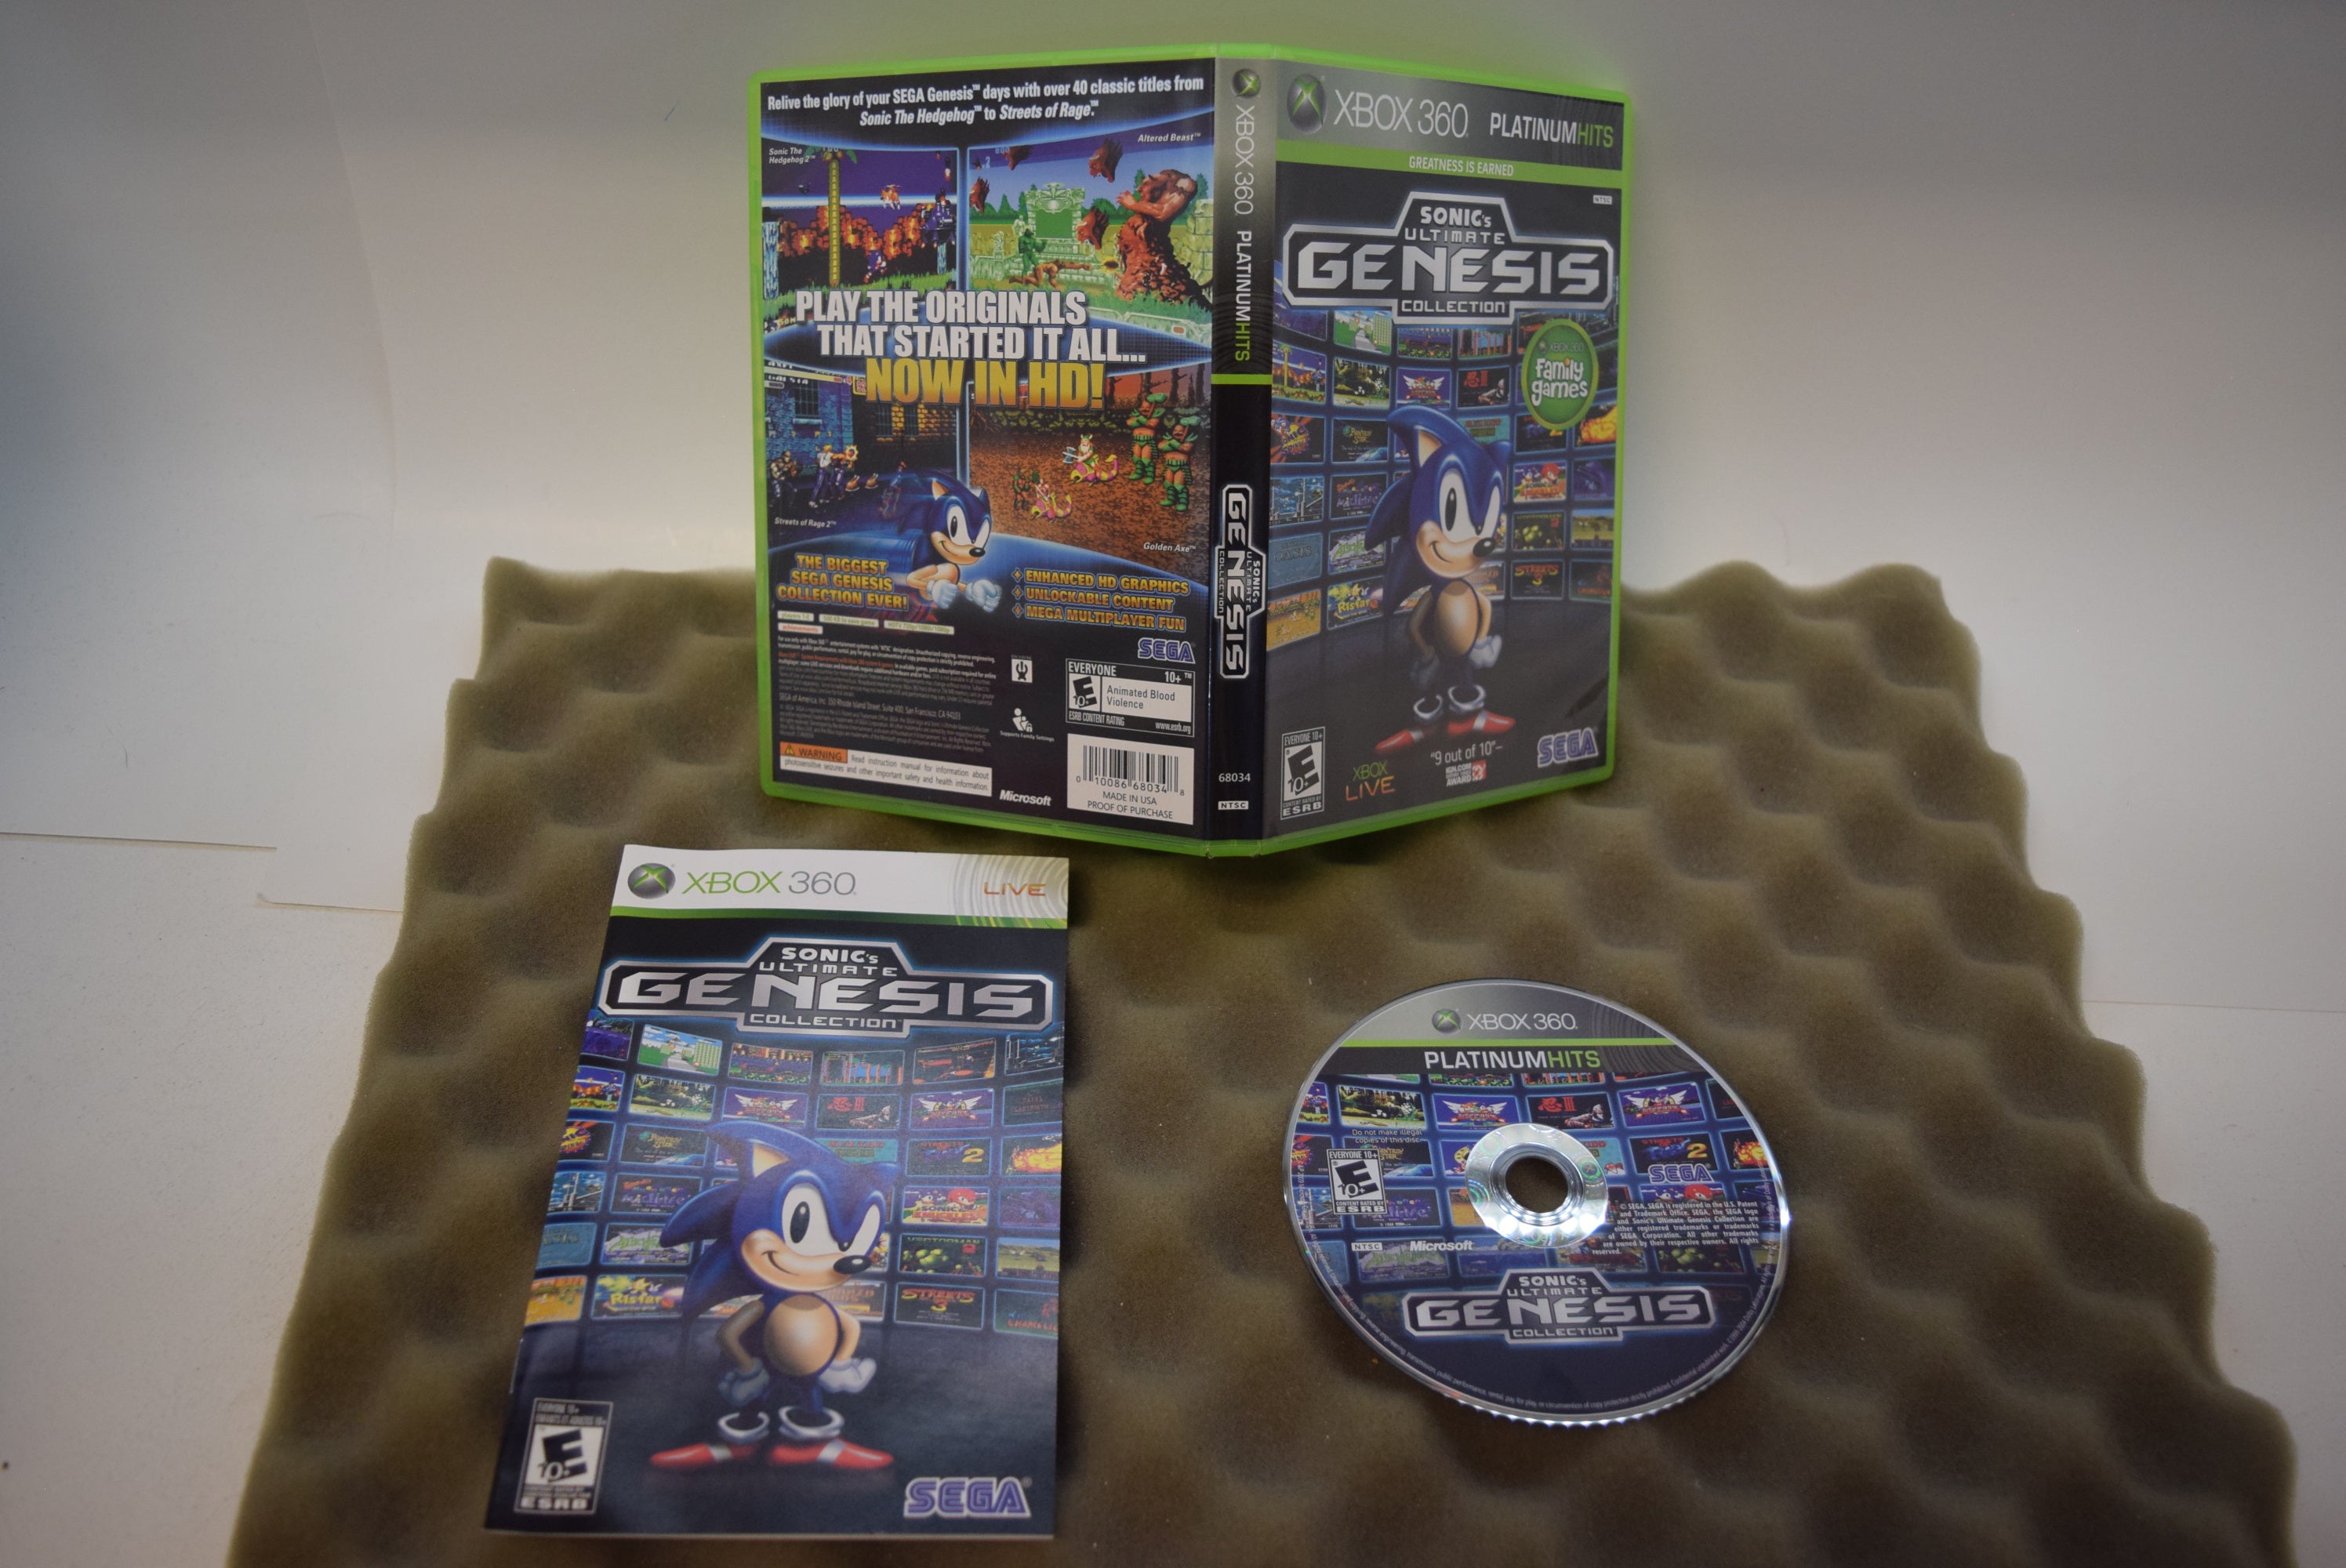  Sonic's Ultimate Genesis Collection (Platinum Hits